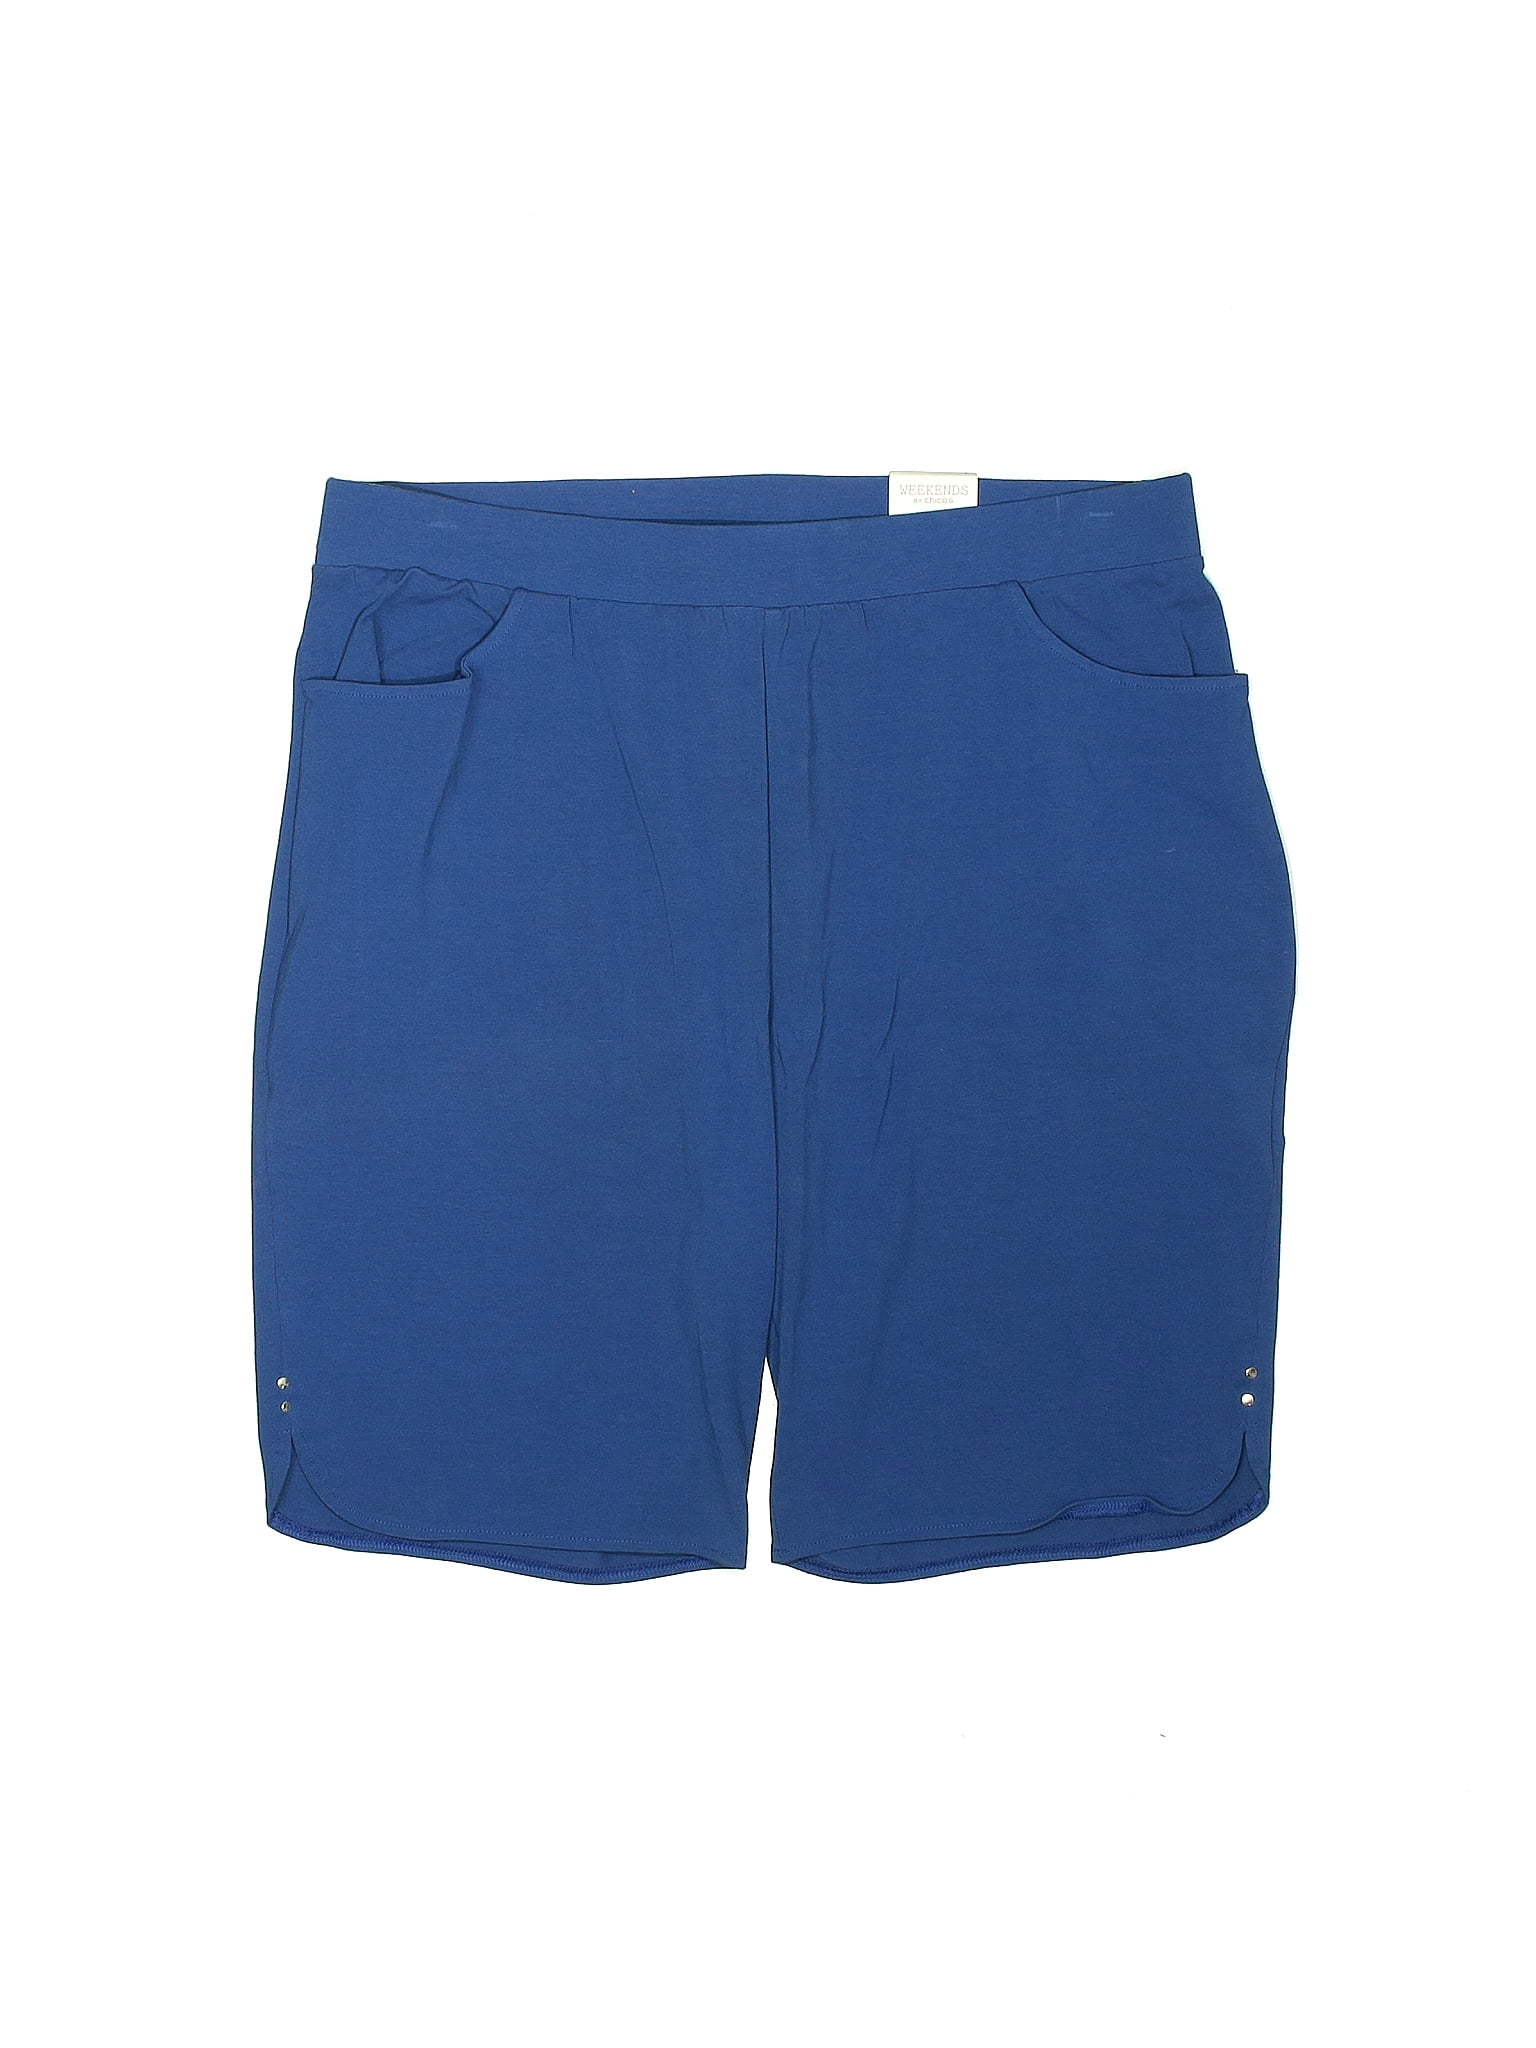 Weekends by Chico's Solid Blue Shorts Size Lg (2) - 56% off | thredUP